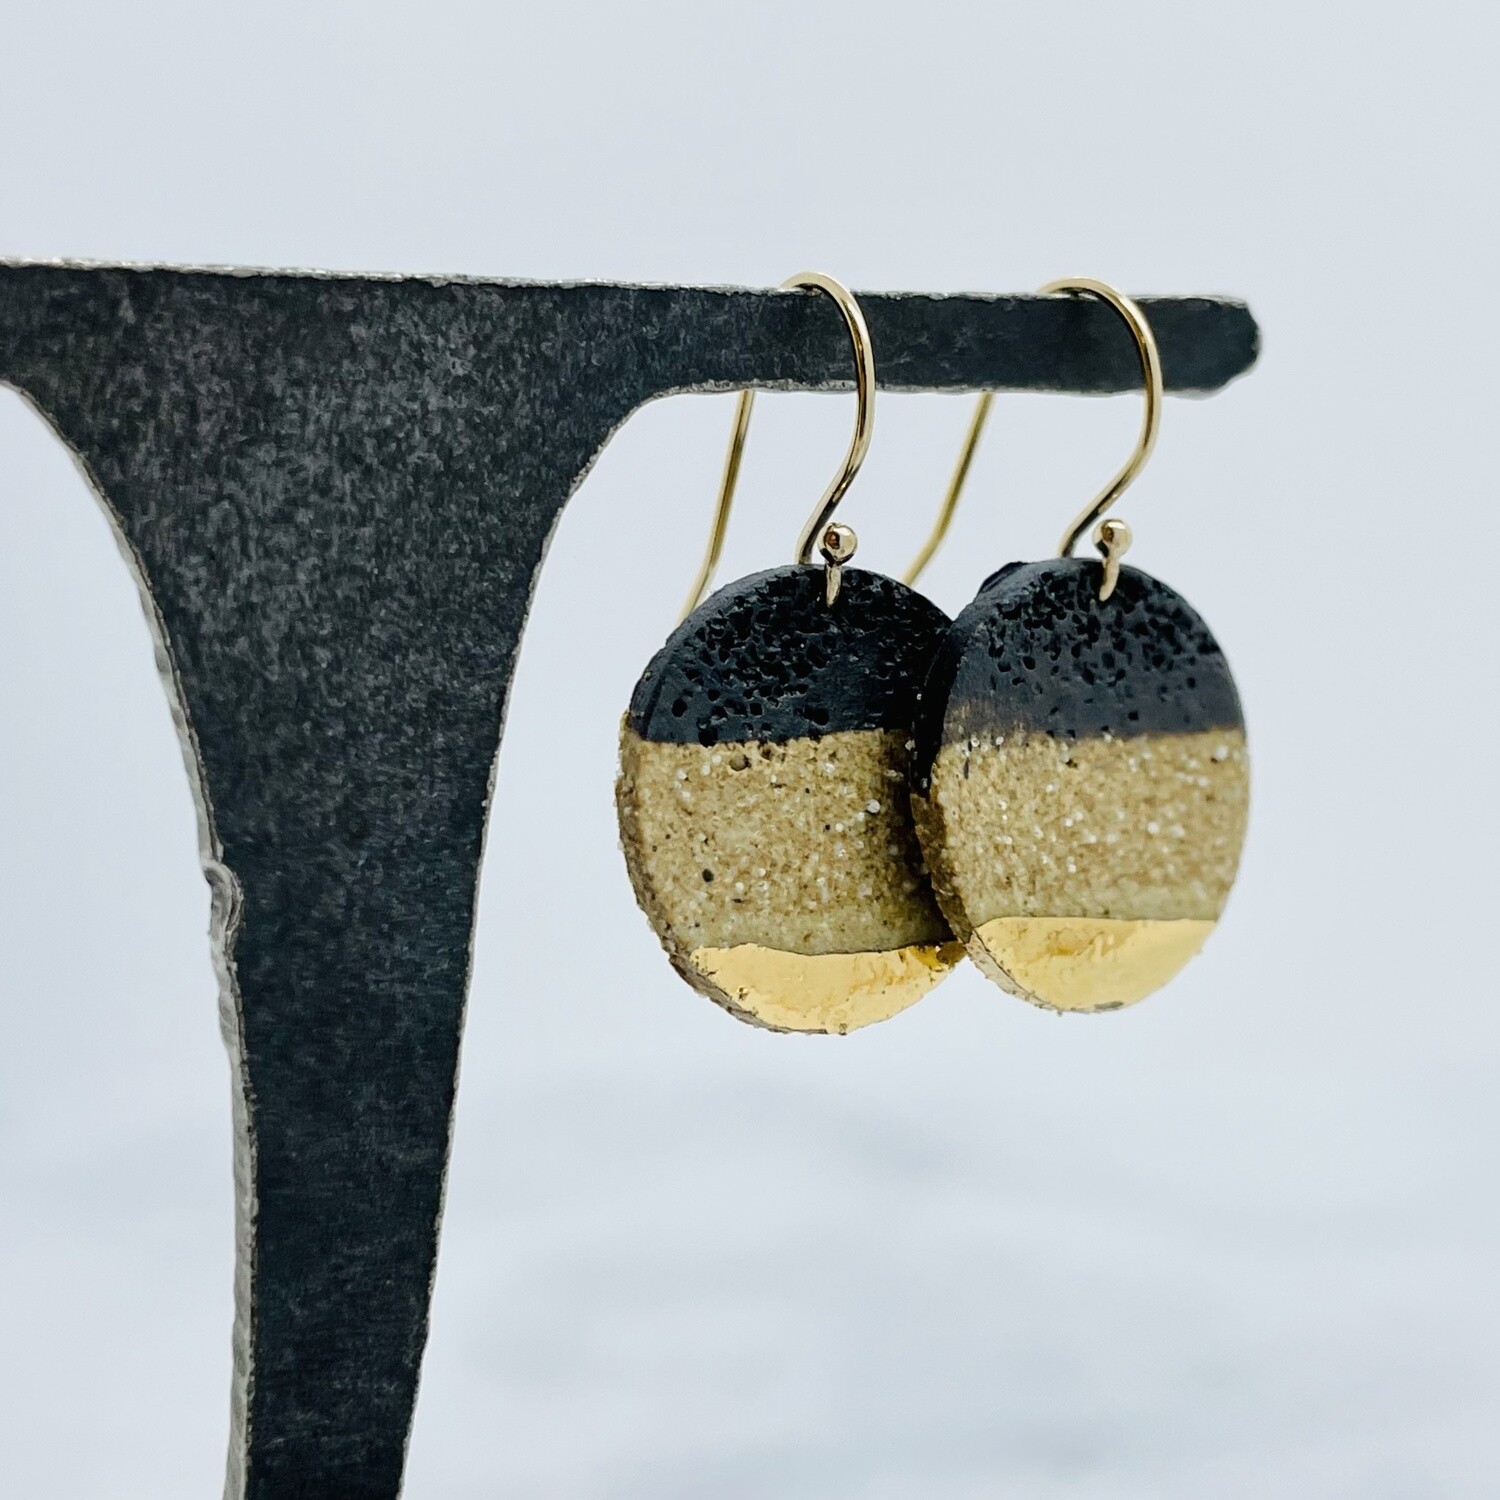 Anini Clay and Stoneware Earrings with Gold Luster